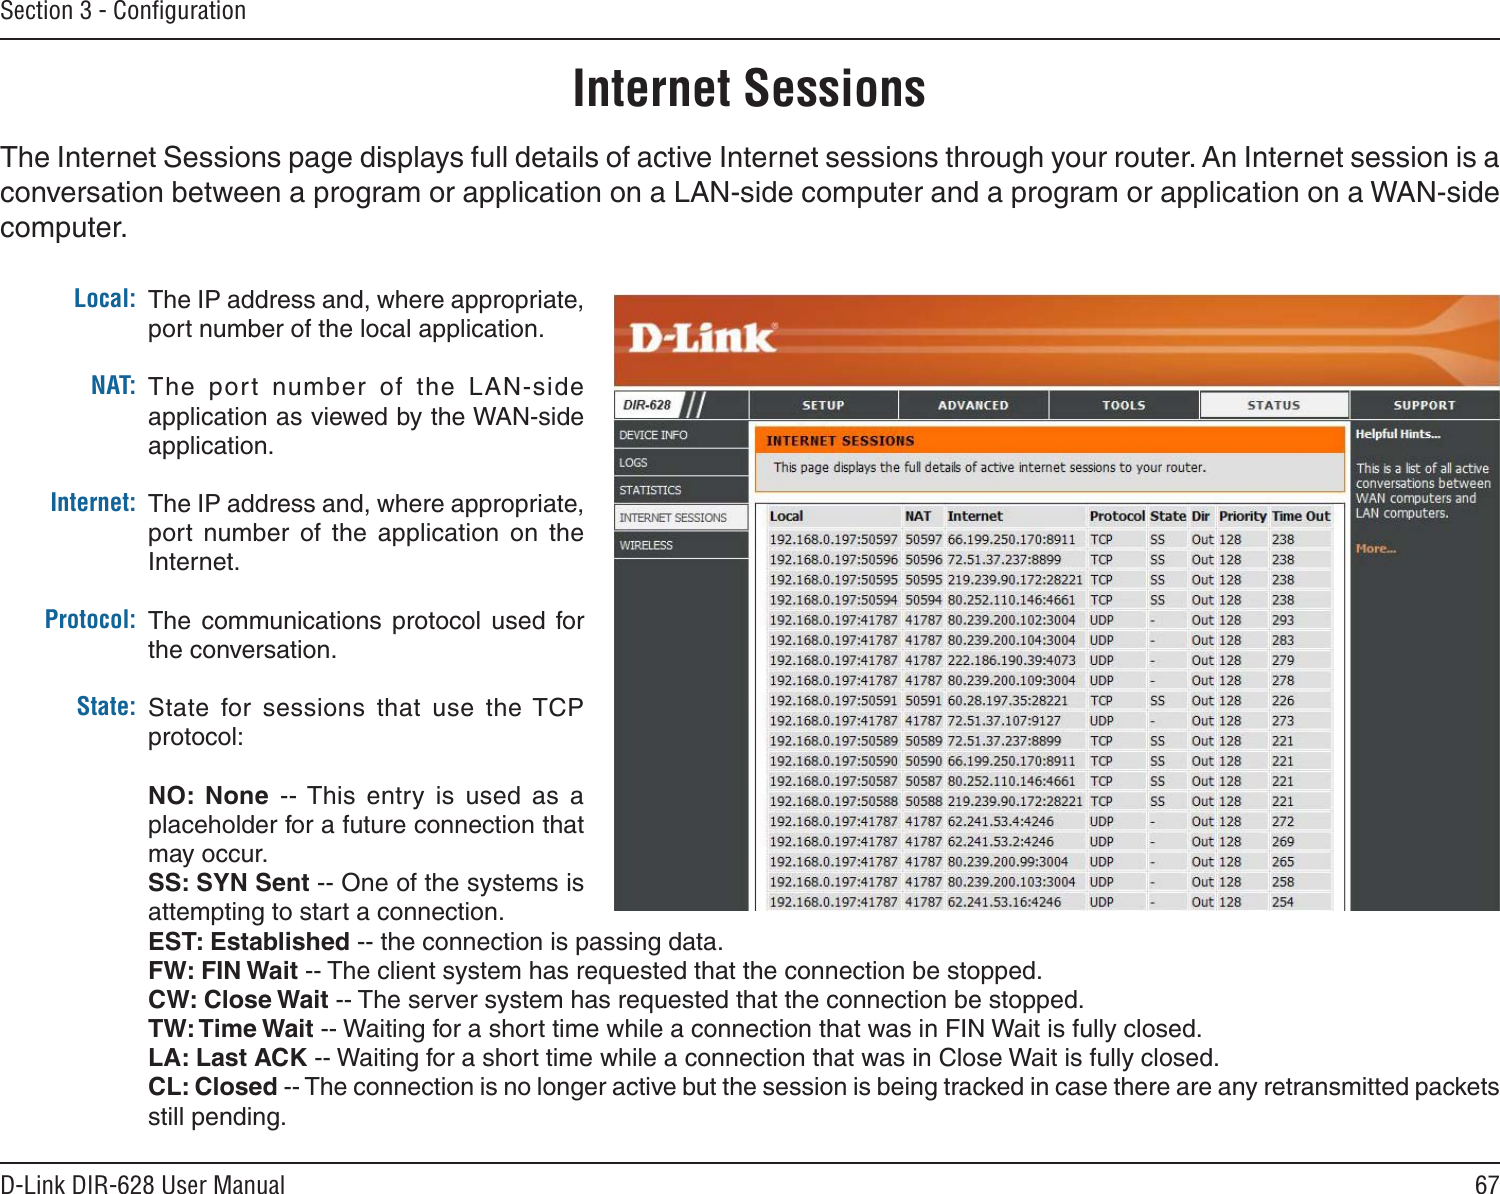 67D-Link DIR-628 User ManualSection 3 - ConﬁgurationInternet SessionsThe Internet Sessions page displays full details of active Internet sessions through your router. An Internet session is a conversation between a program or application on a LAN-side computer and a program or application on a WAN-side computer. Local:NAT:Internet:Protocol:State:The IP address and, where appropriate, port number of the local application. The  port  number  of  the  LAN-side application as viewed by the WAN-side application. The IP address and, where appropriate, port  number  of  the  application  on  the Internet. The  communications  protocol  used  for the conversation. State  for  sessions  that  use  the TCP protocol:NO:  None  -- This  entry  is  used  as  a placeholder for a future connection that may occur.SS: SYN Sent -- One of the systems is attempting to start a connection.EST: Established -- the connection is passing data.FW: FIN Wait -- The client system has requested that the connection be stopped.CW: Close Wait -- The server system has requested that the connection be stopped.TW: Time Wait -- Waiting for a short time while a connection that was in FIN Wait is fully closed.LA: Last ACK -- Waiting for a short time while a connection that was in Close Wait is fully closed.CL: Closed -- The connection is no longer active but the session is being tracked in case there are any retransmitted packets still pending.